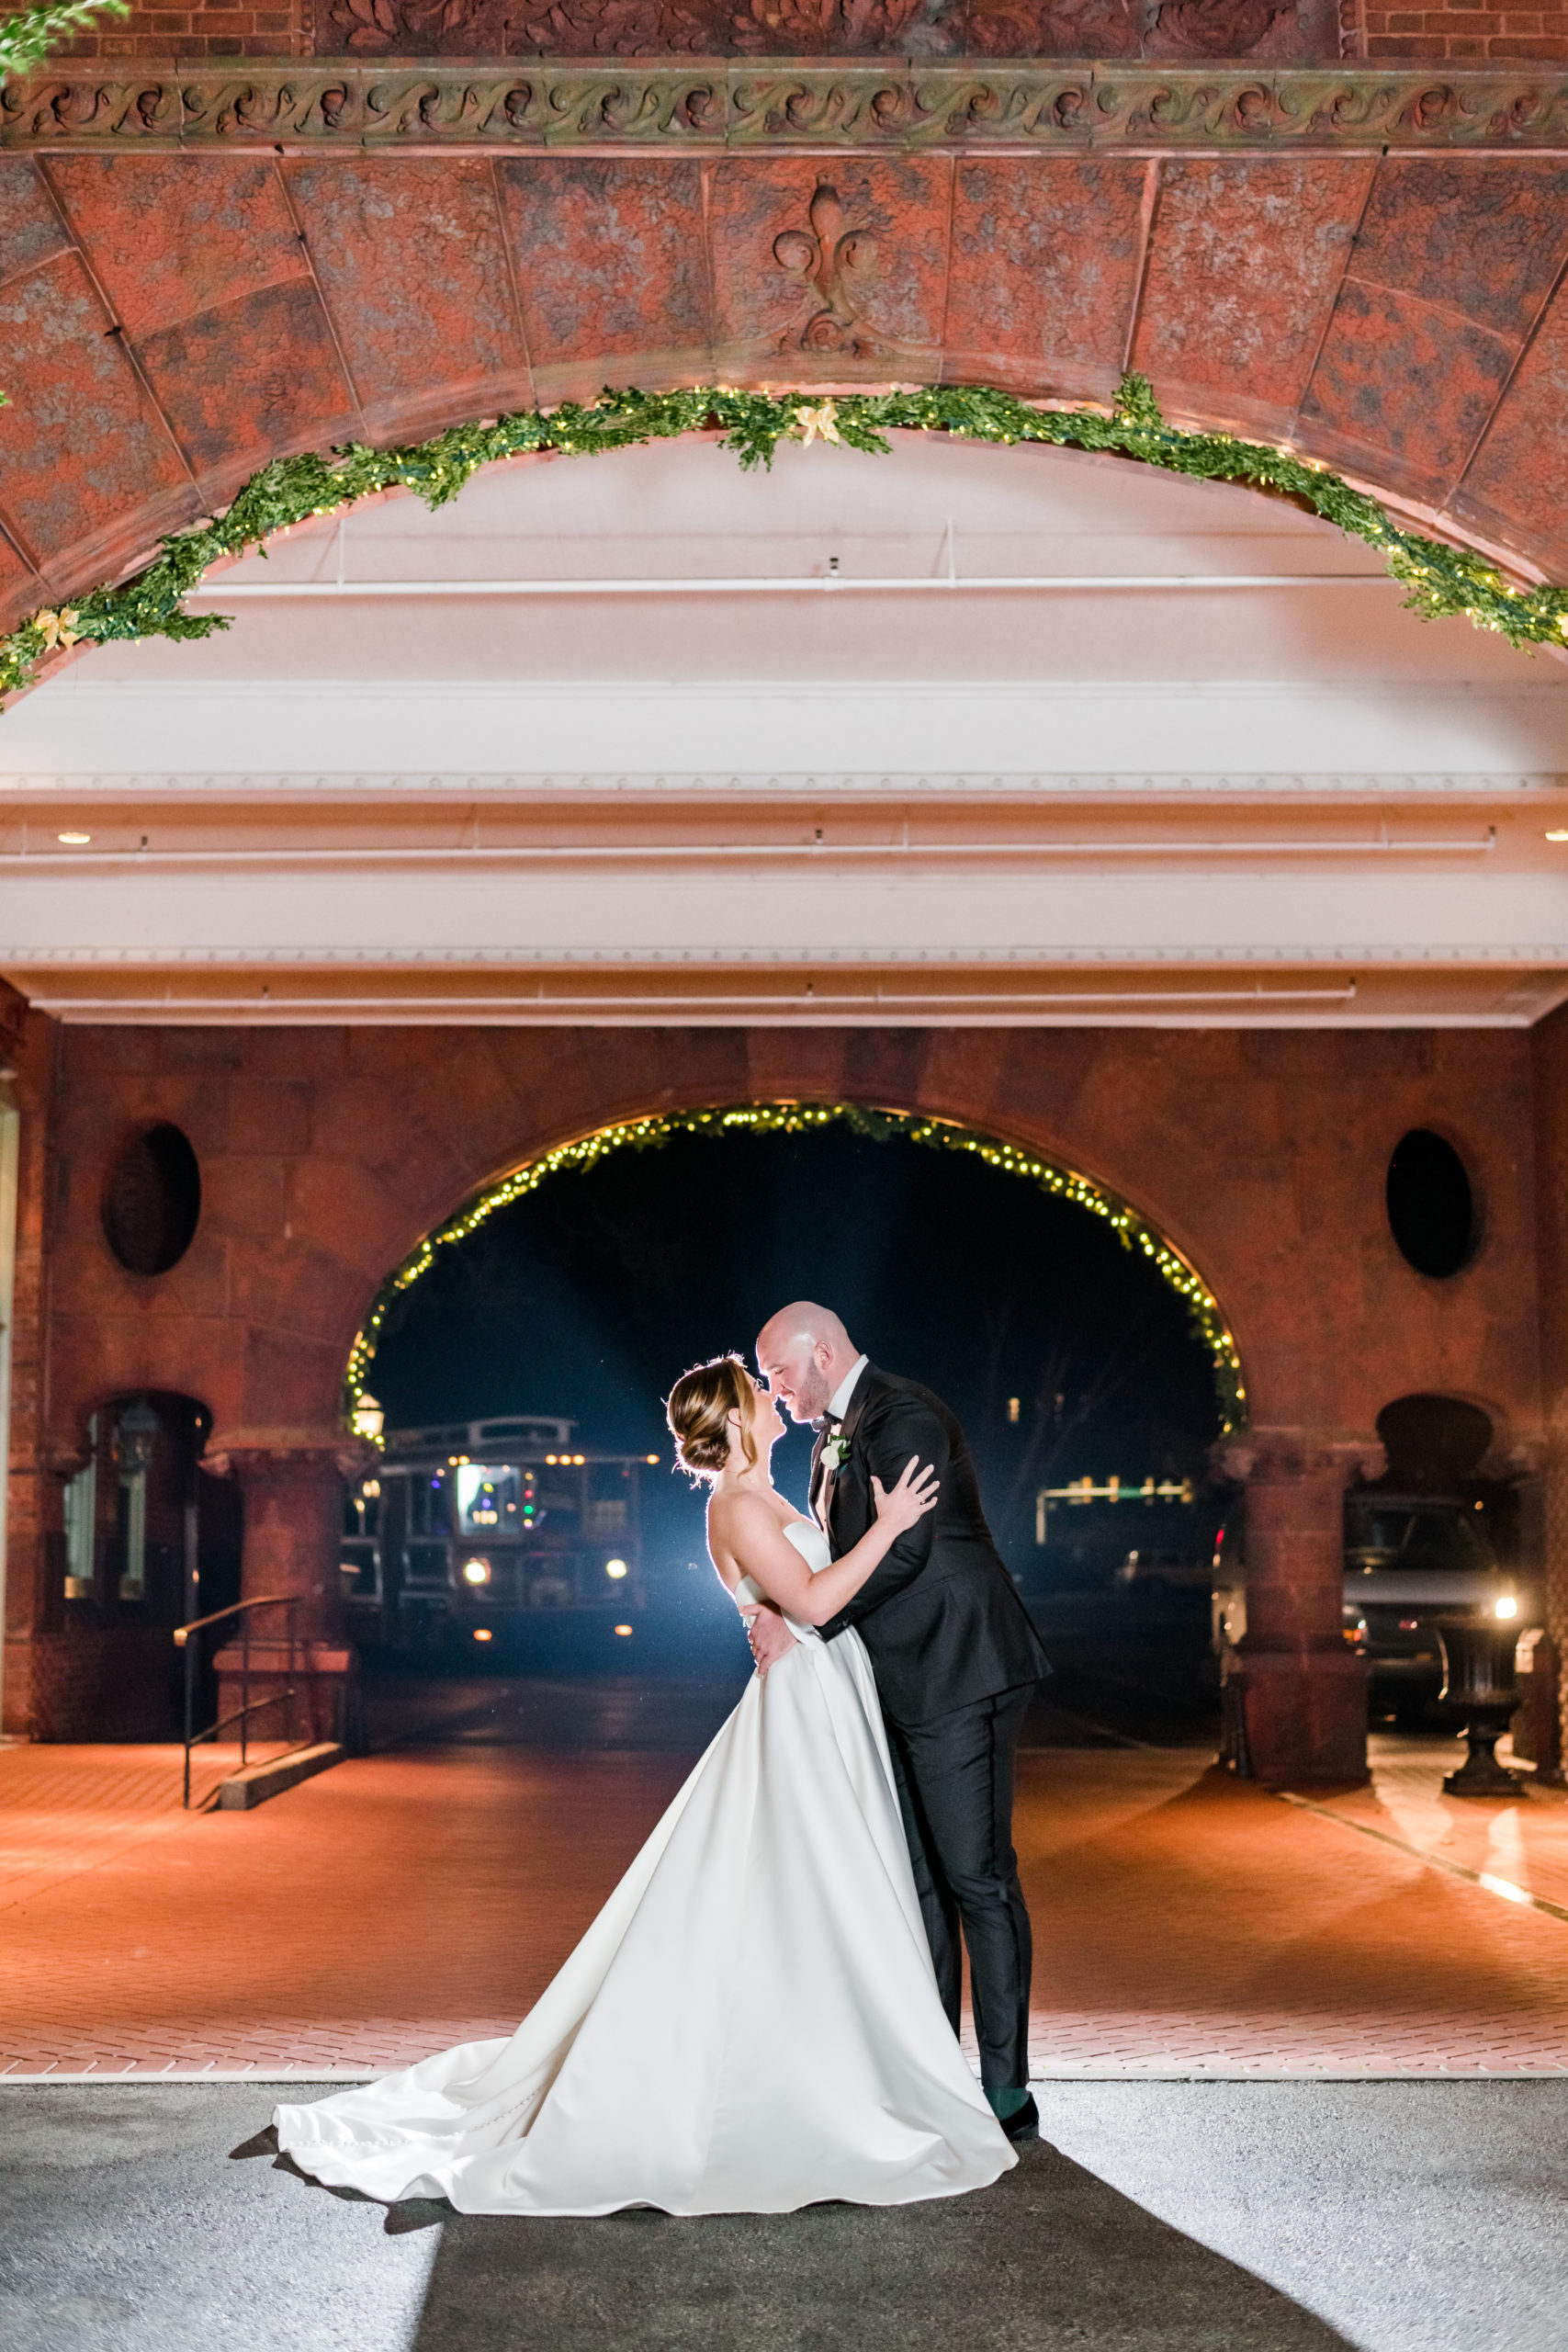 New Years Eve Wedding at Merion Cricket Club | Andrea Krout Photography